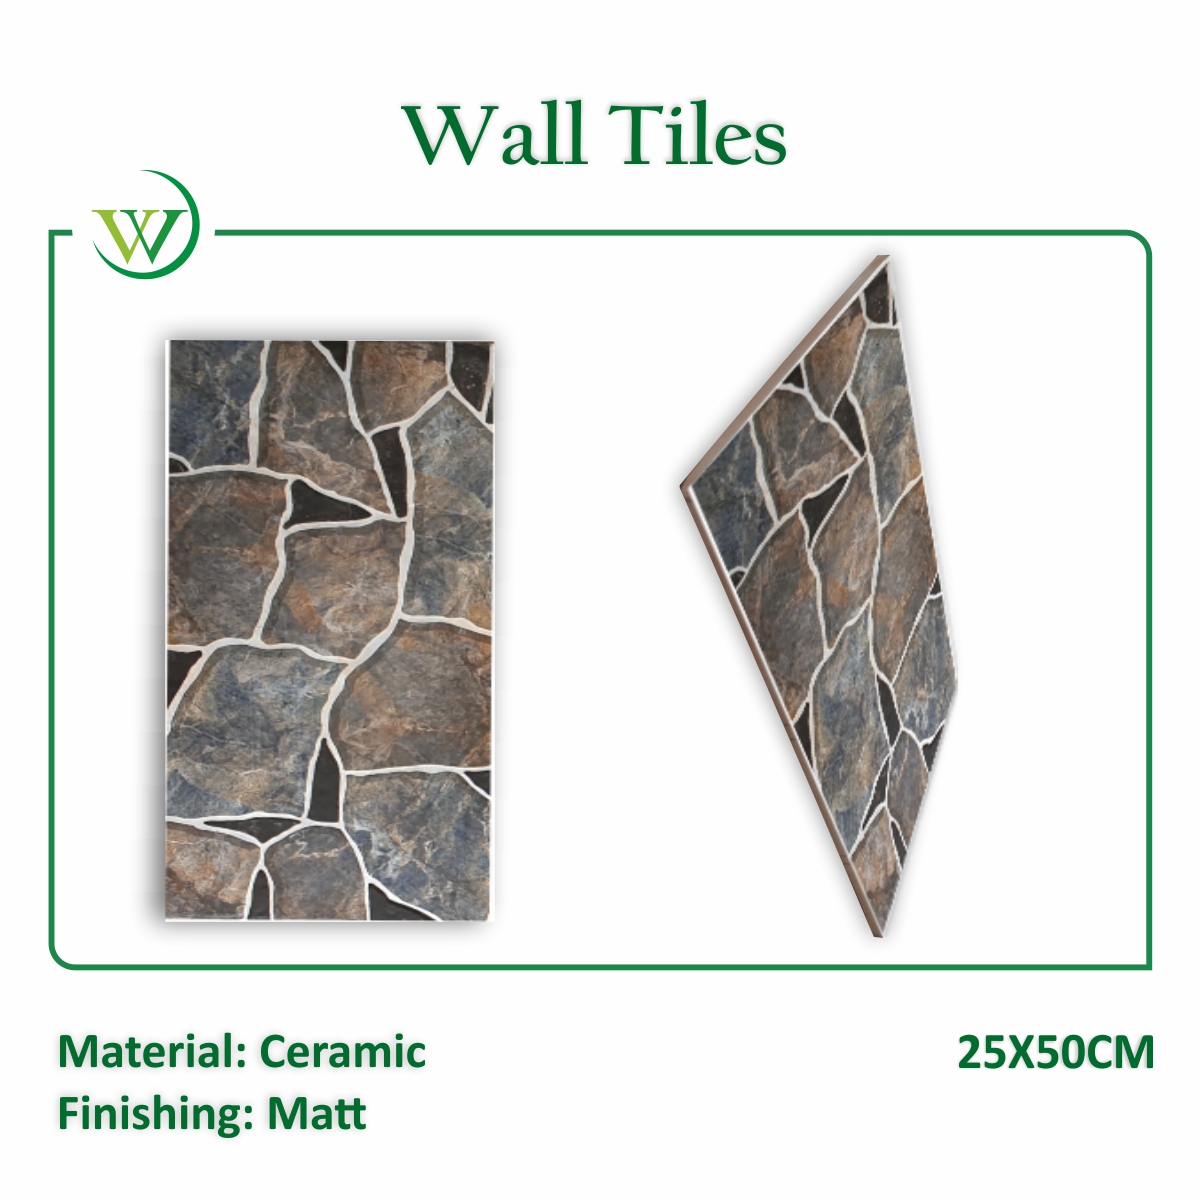 Split Rock Wall Tiles

This tile protects your exterior walls from damages and withstands very mild or harsh weather conditions.

Usage:- Building walls, fence walls & pillars. It can also be used on the tv stand.

Send us a message 

#wutarickstore #walltiles #exteriorwalltile